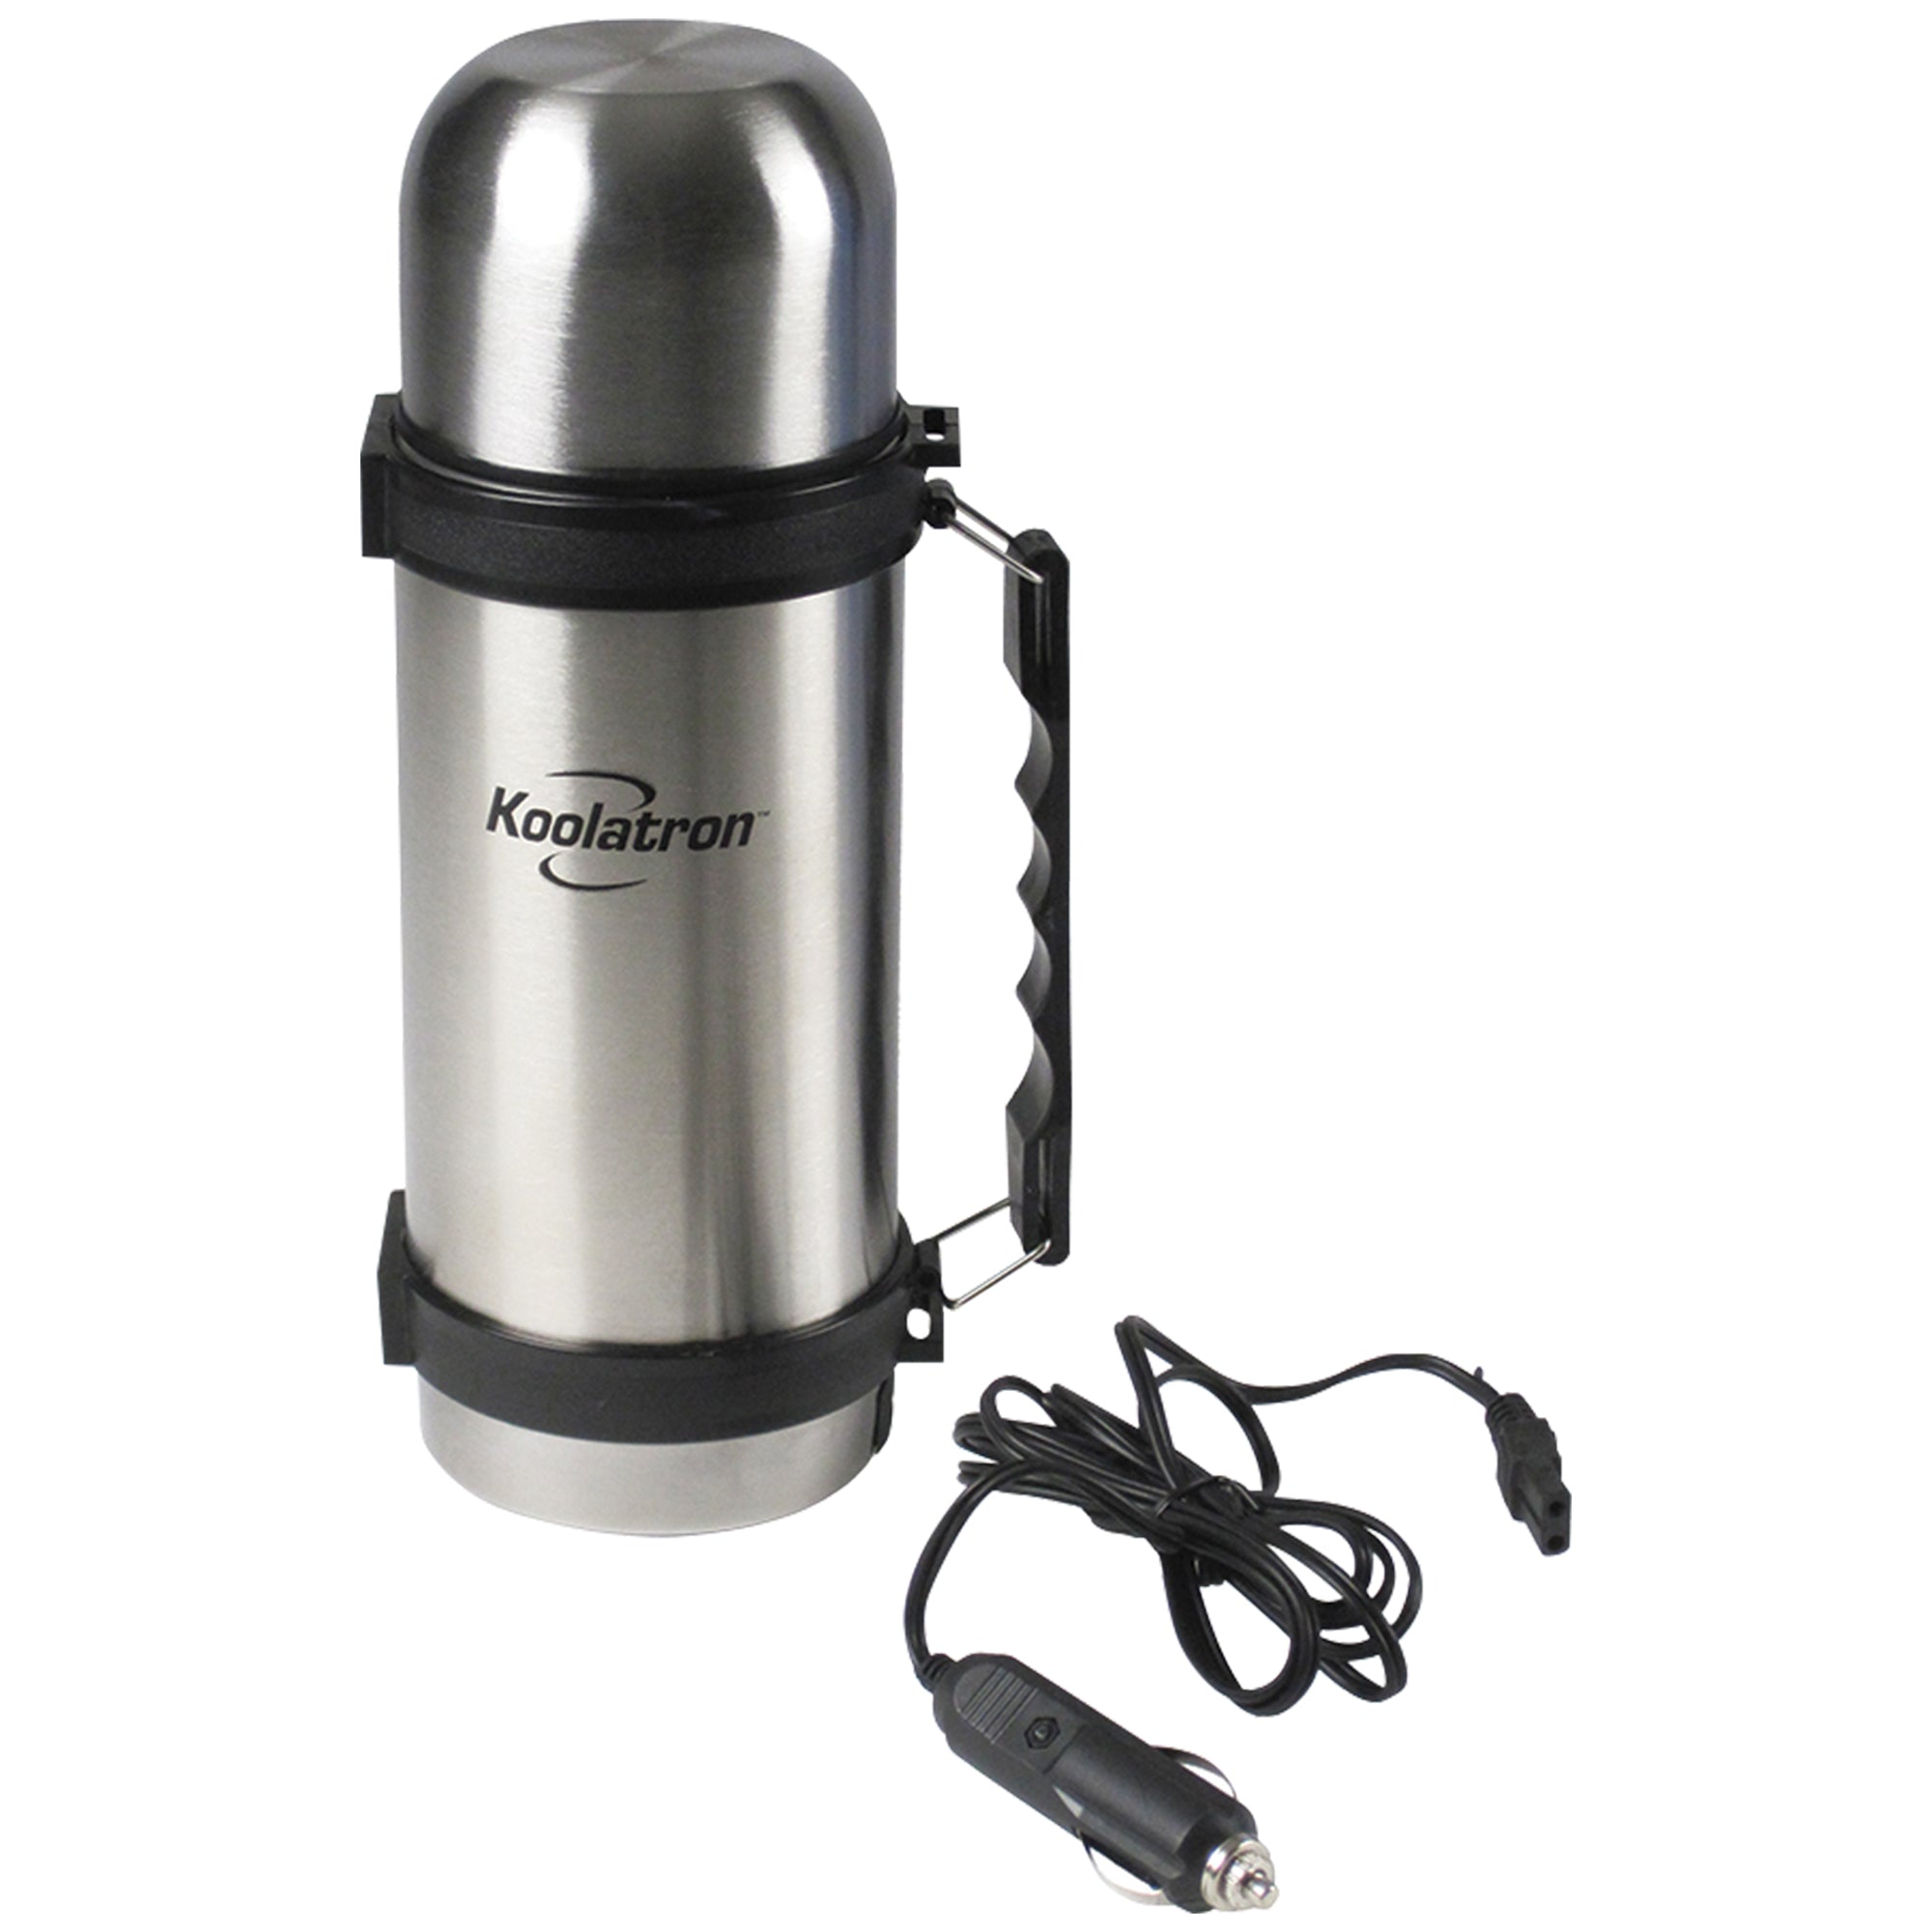 12V Portable In-Car Coffee Maker Tea Pot Thermos Heating Stainless Steel  Cup New